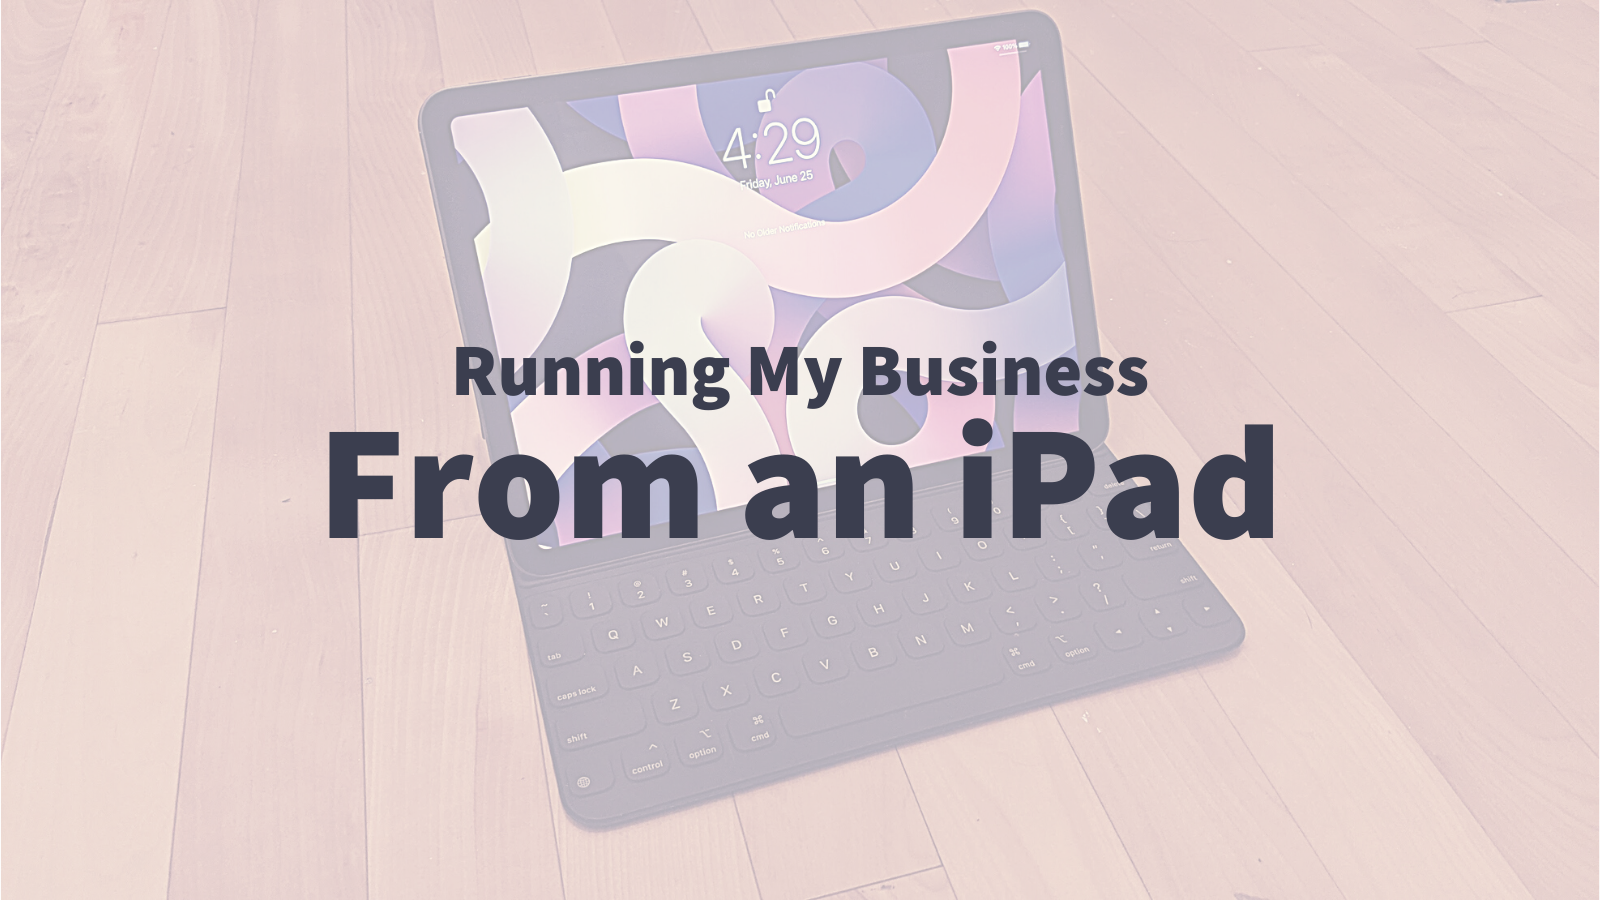 Running My Business From an iPad